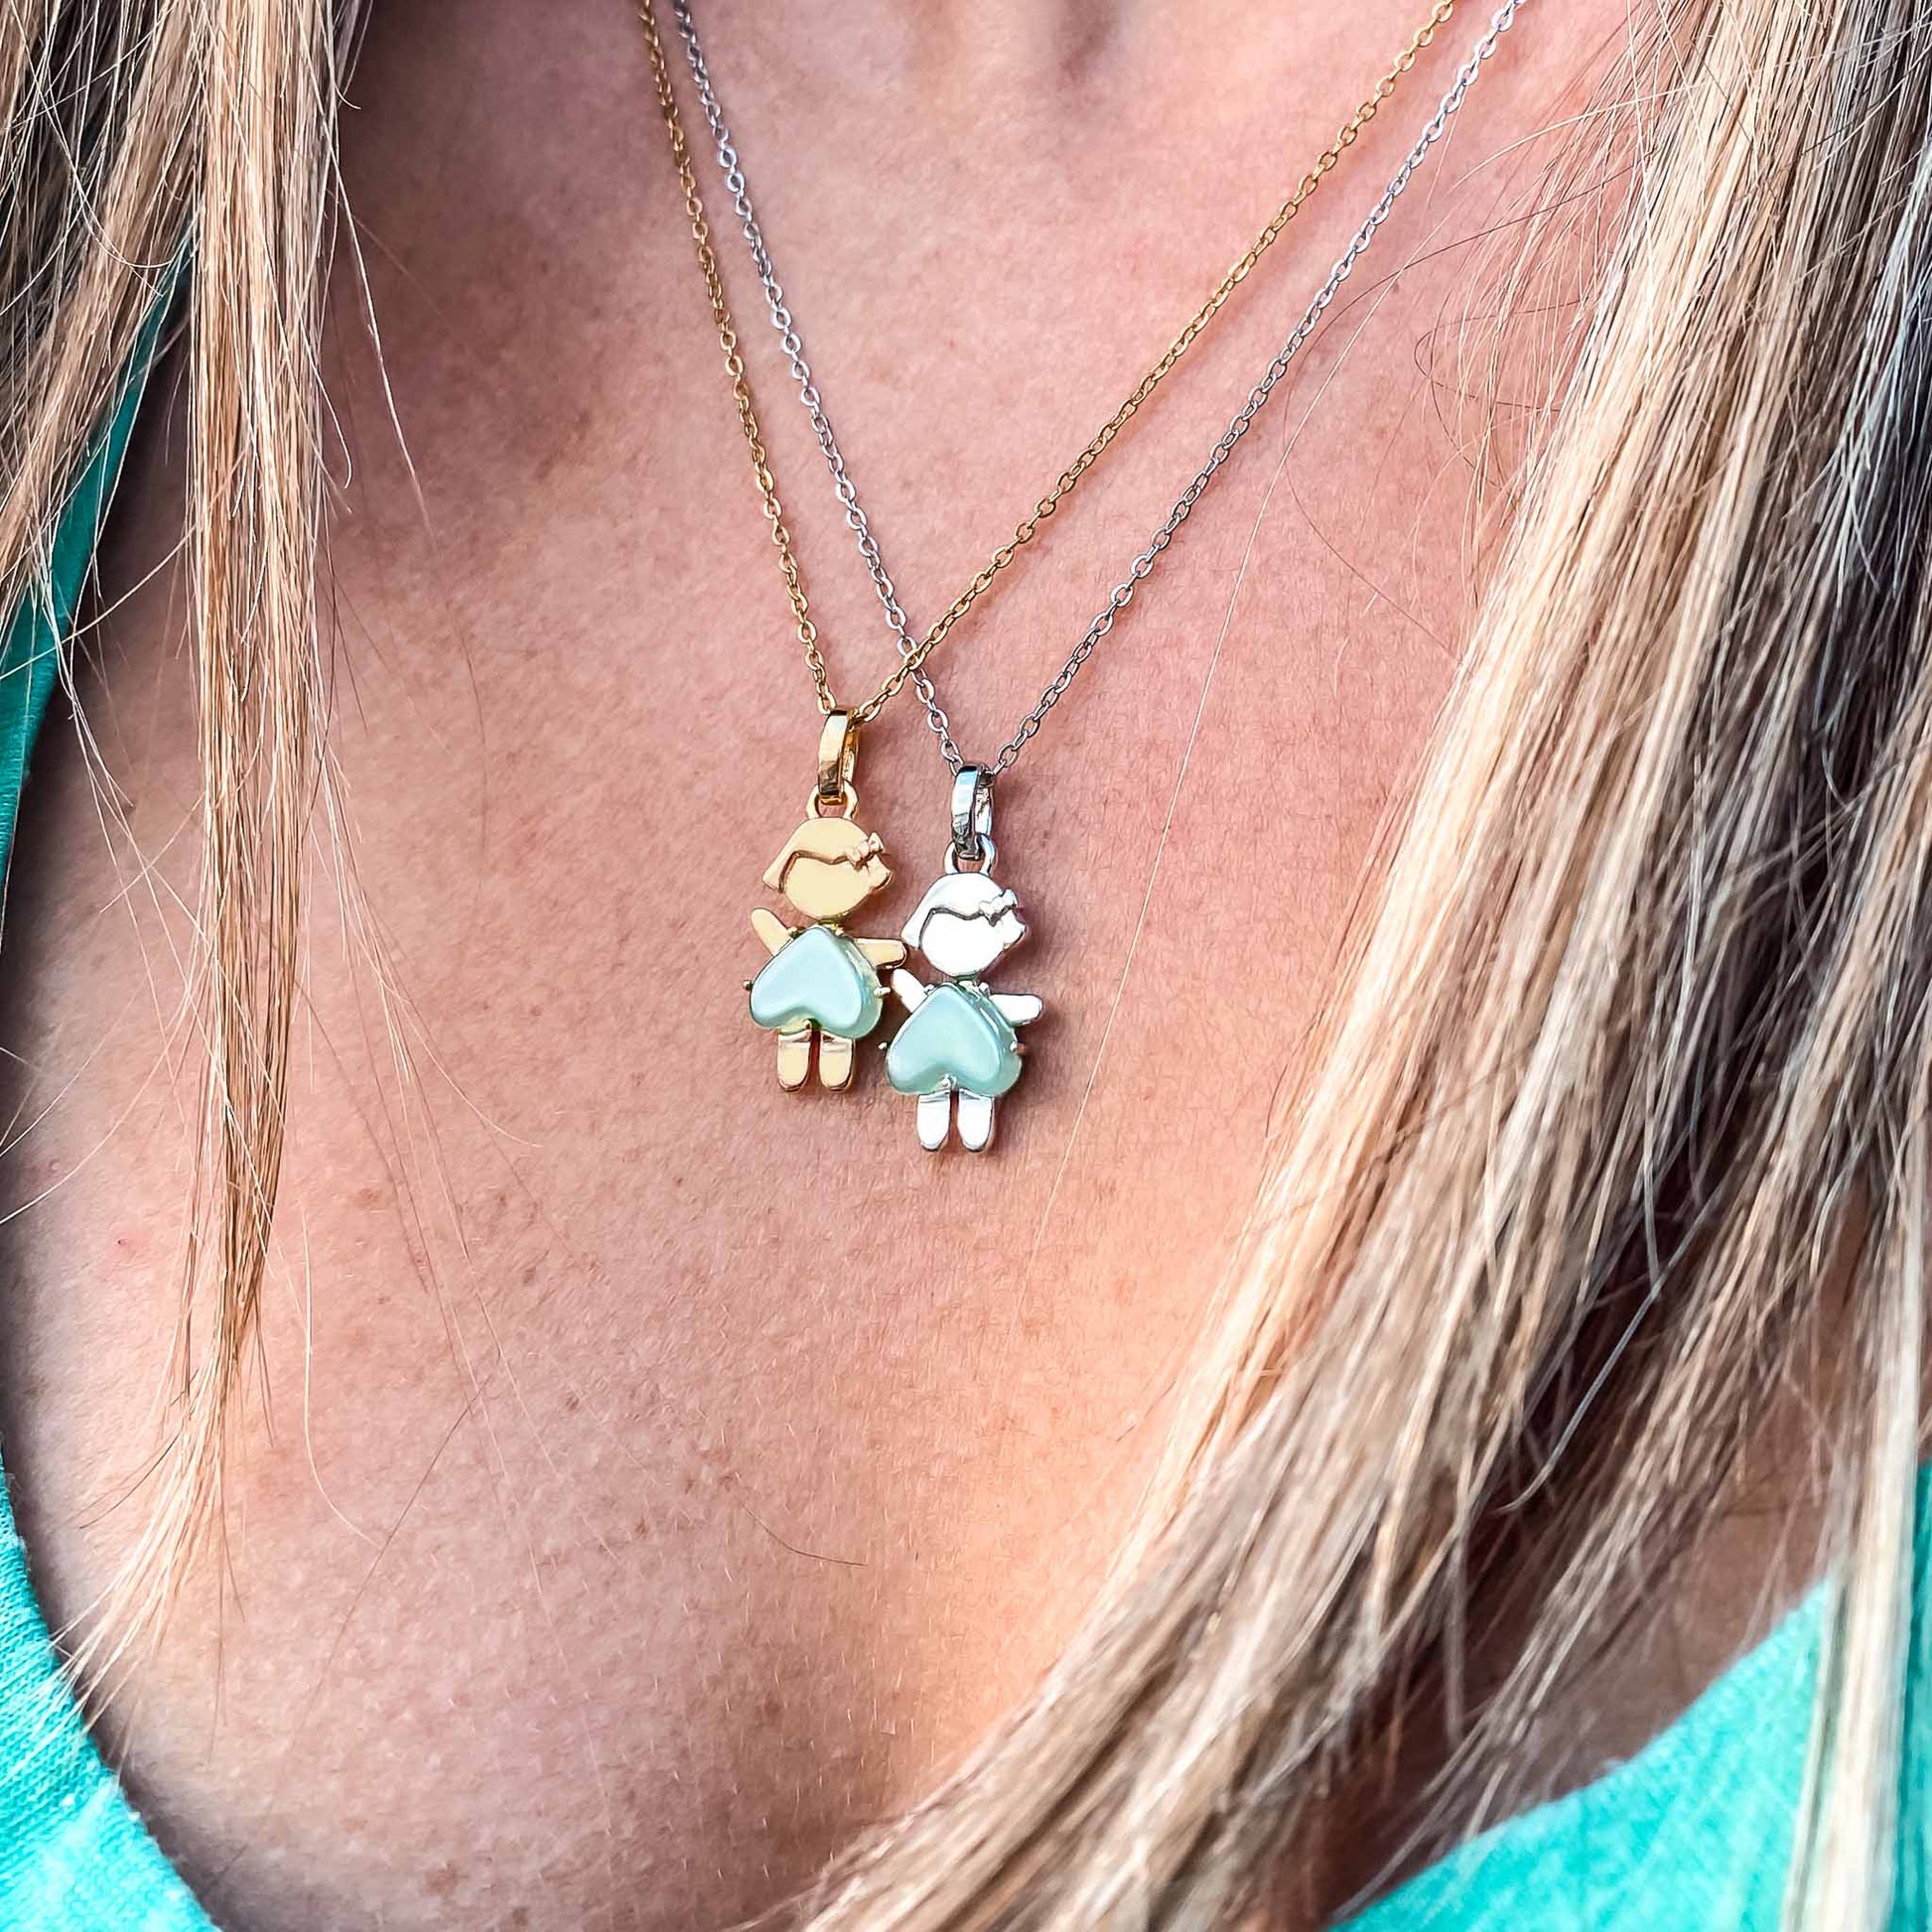 One-of-a-kind birthstone jewelry collection. This unique & meaningful birthstone charm necklace is the perfect gift for yourself, Mother's Day, Valentine's Day, baby shower, Christmas & birthdays. A personalized gift idea for every mom, mom-to-be, grandma, bride, bridesmaid, daughter, wife, mother-in-law & loved one.